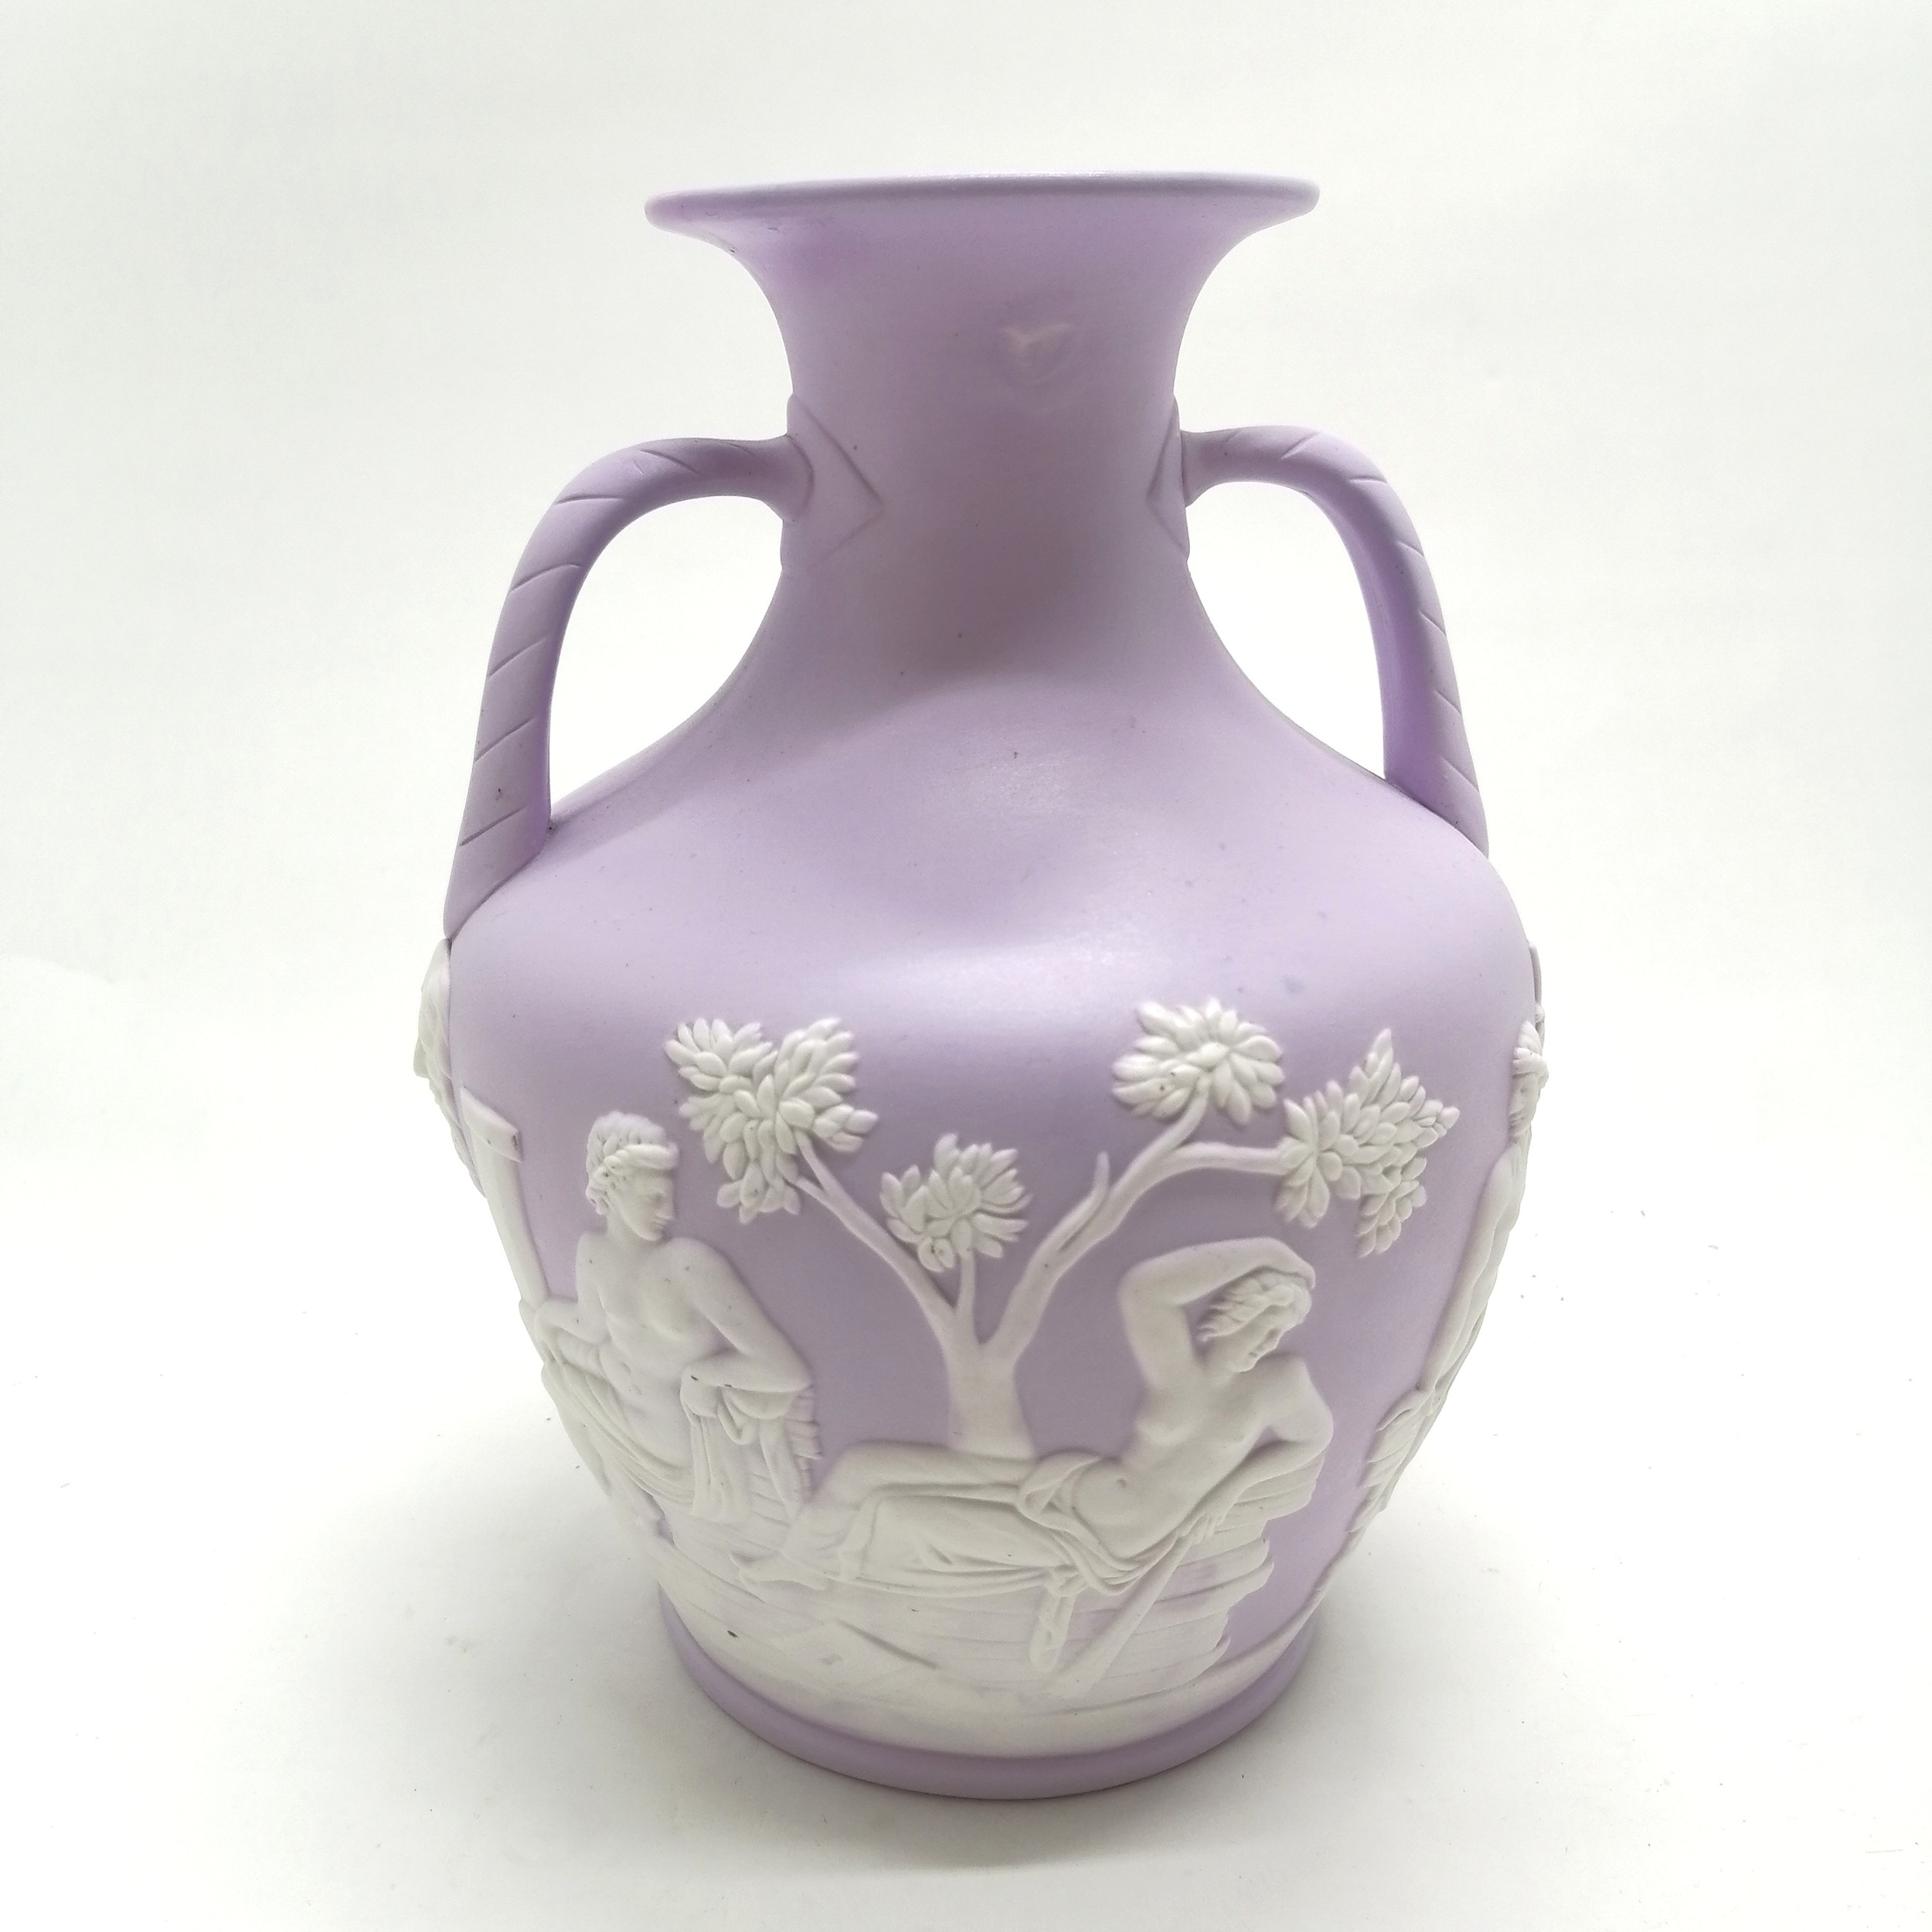 Wedgwood style Portland vase on pink / lilac ground - 25cm high ~ some restoration to top rim - Image 6 of 7